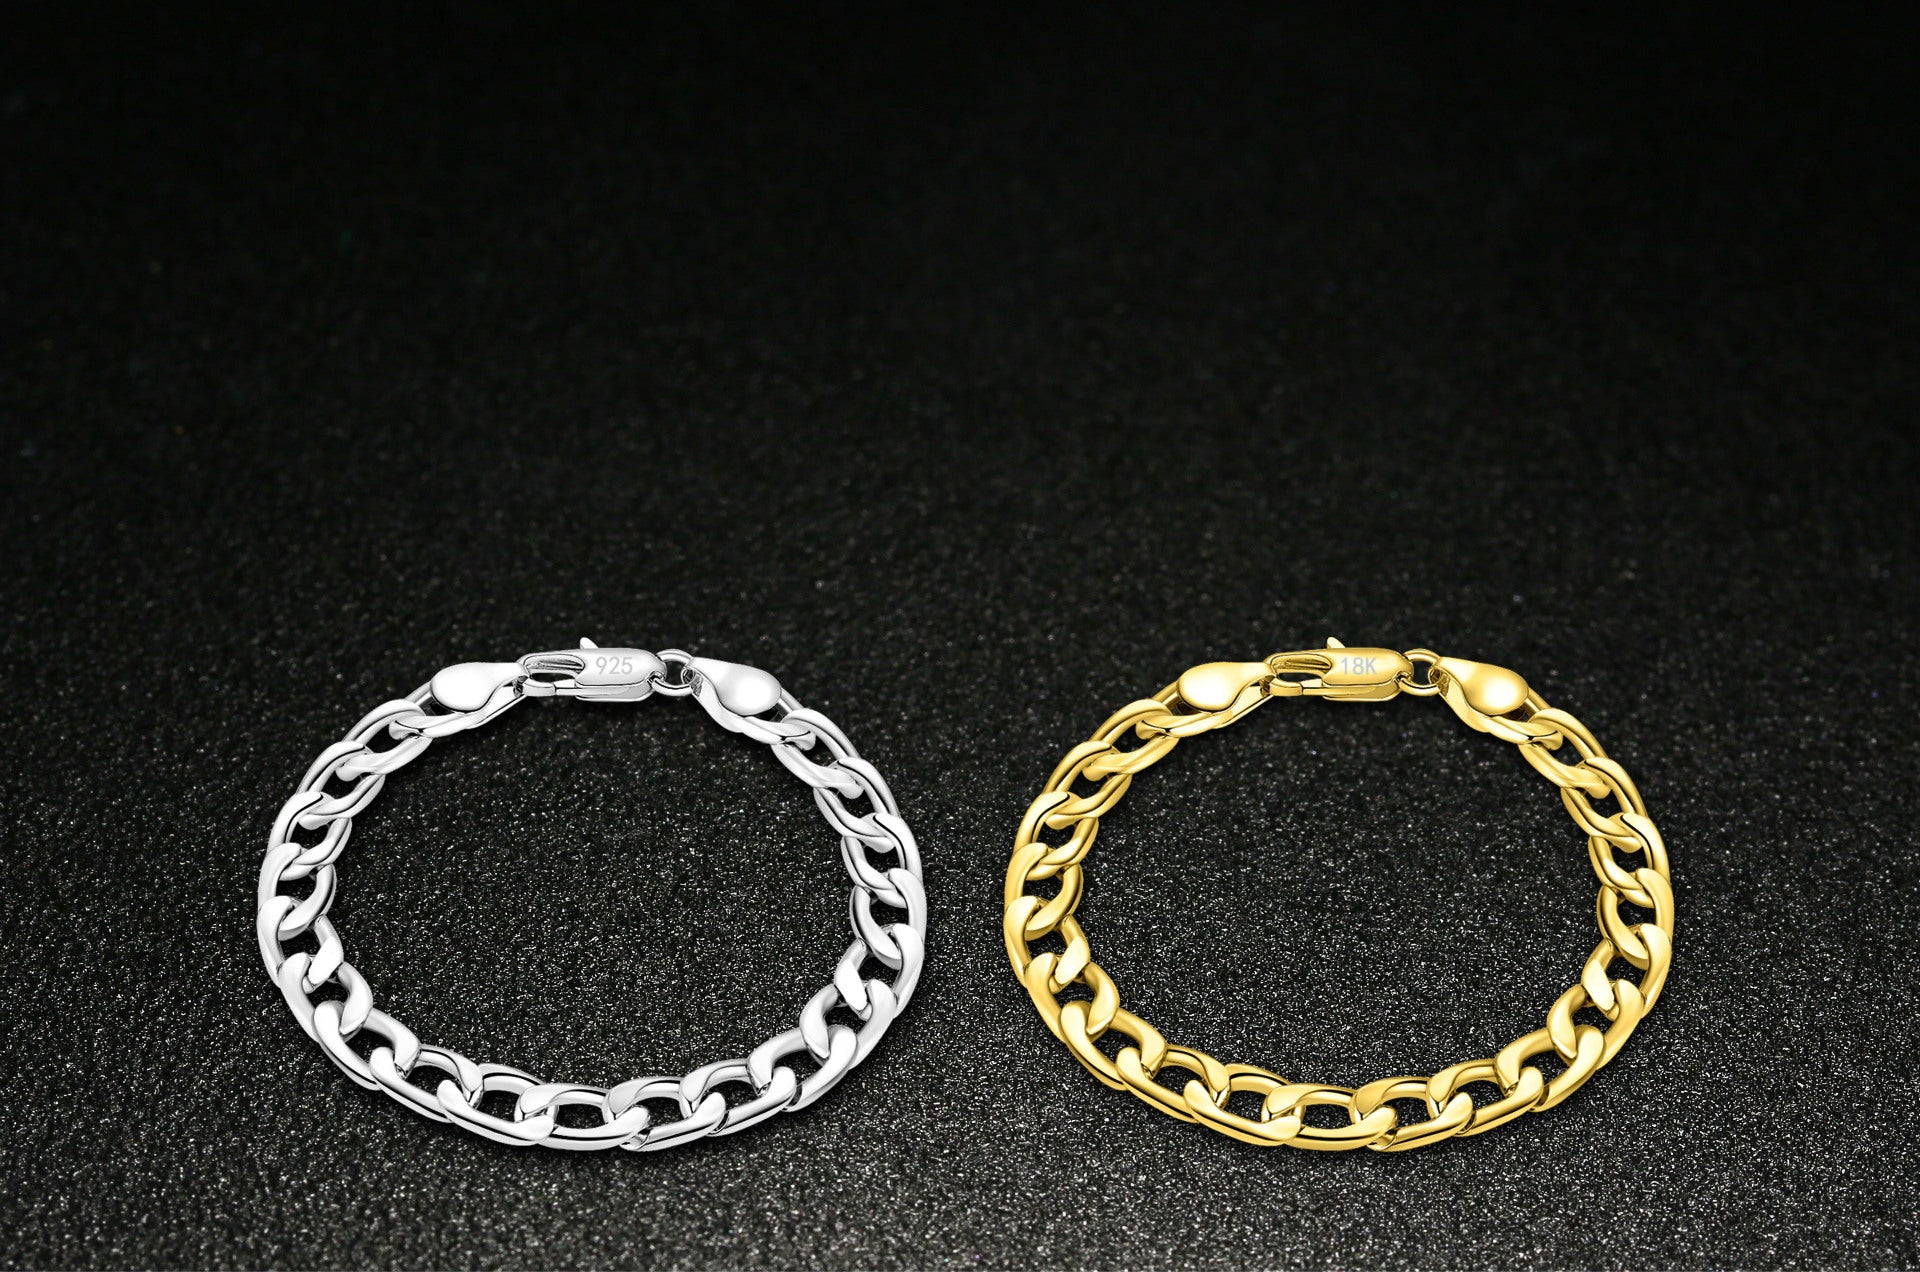 Chunky Sideways Chain Bracelet: Silver and 18k Gold plated